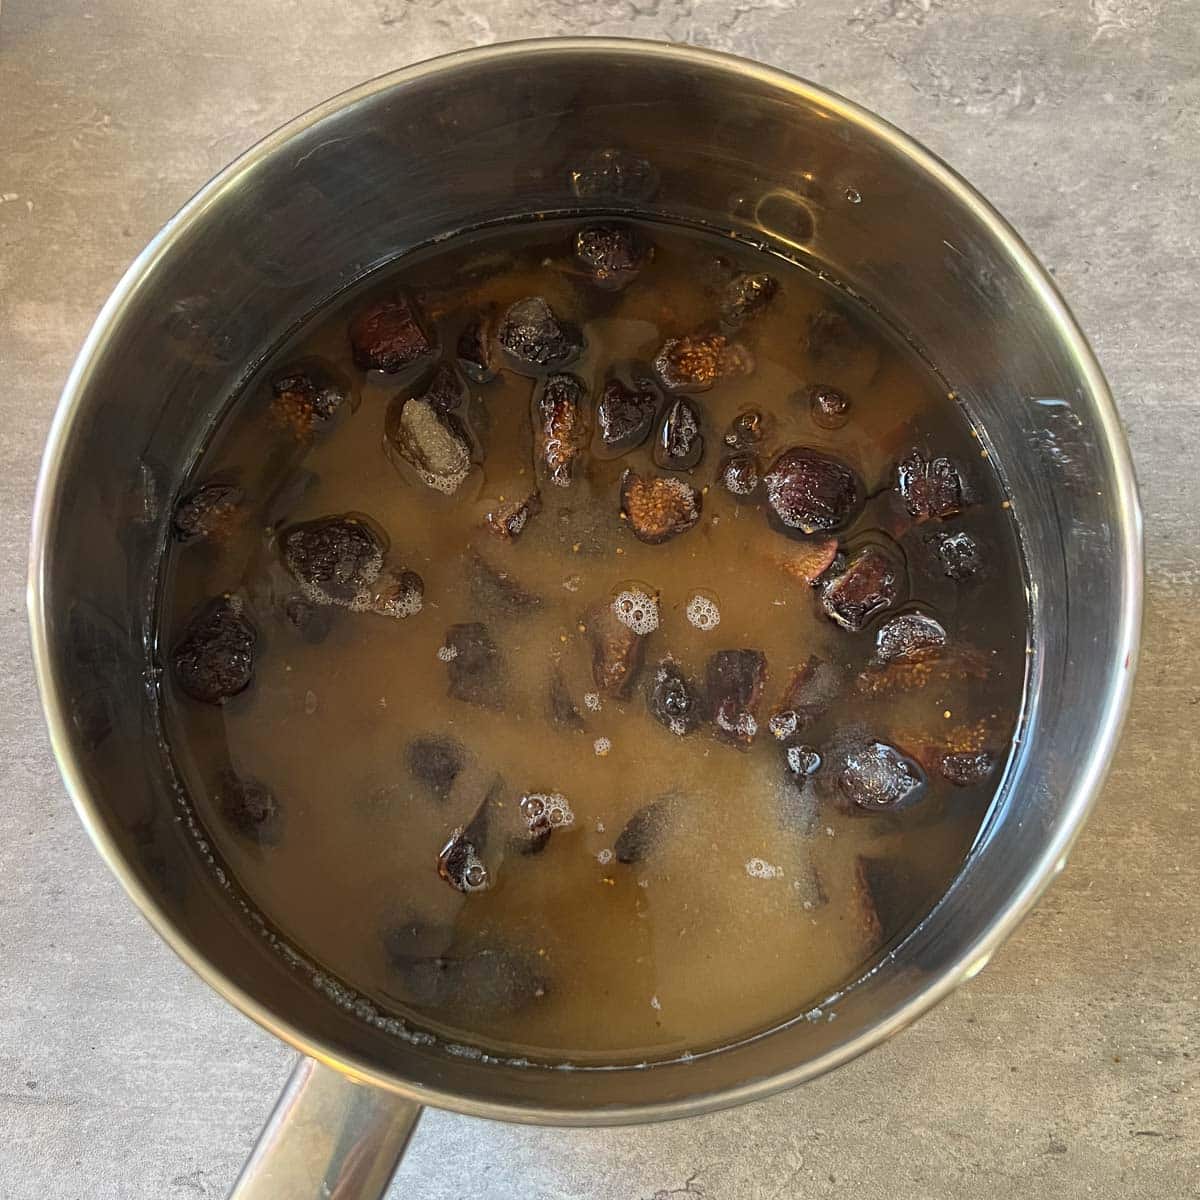 figs with water and suggar added to the pot